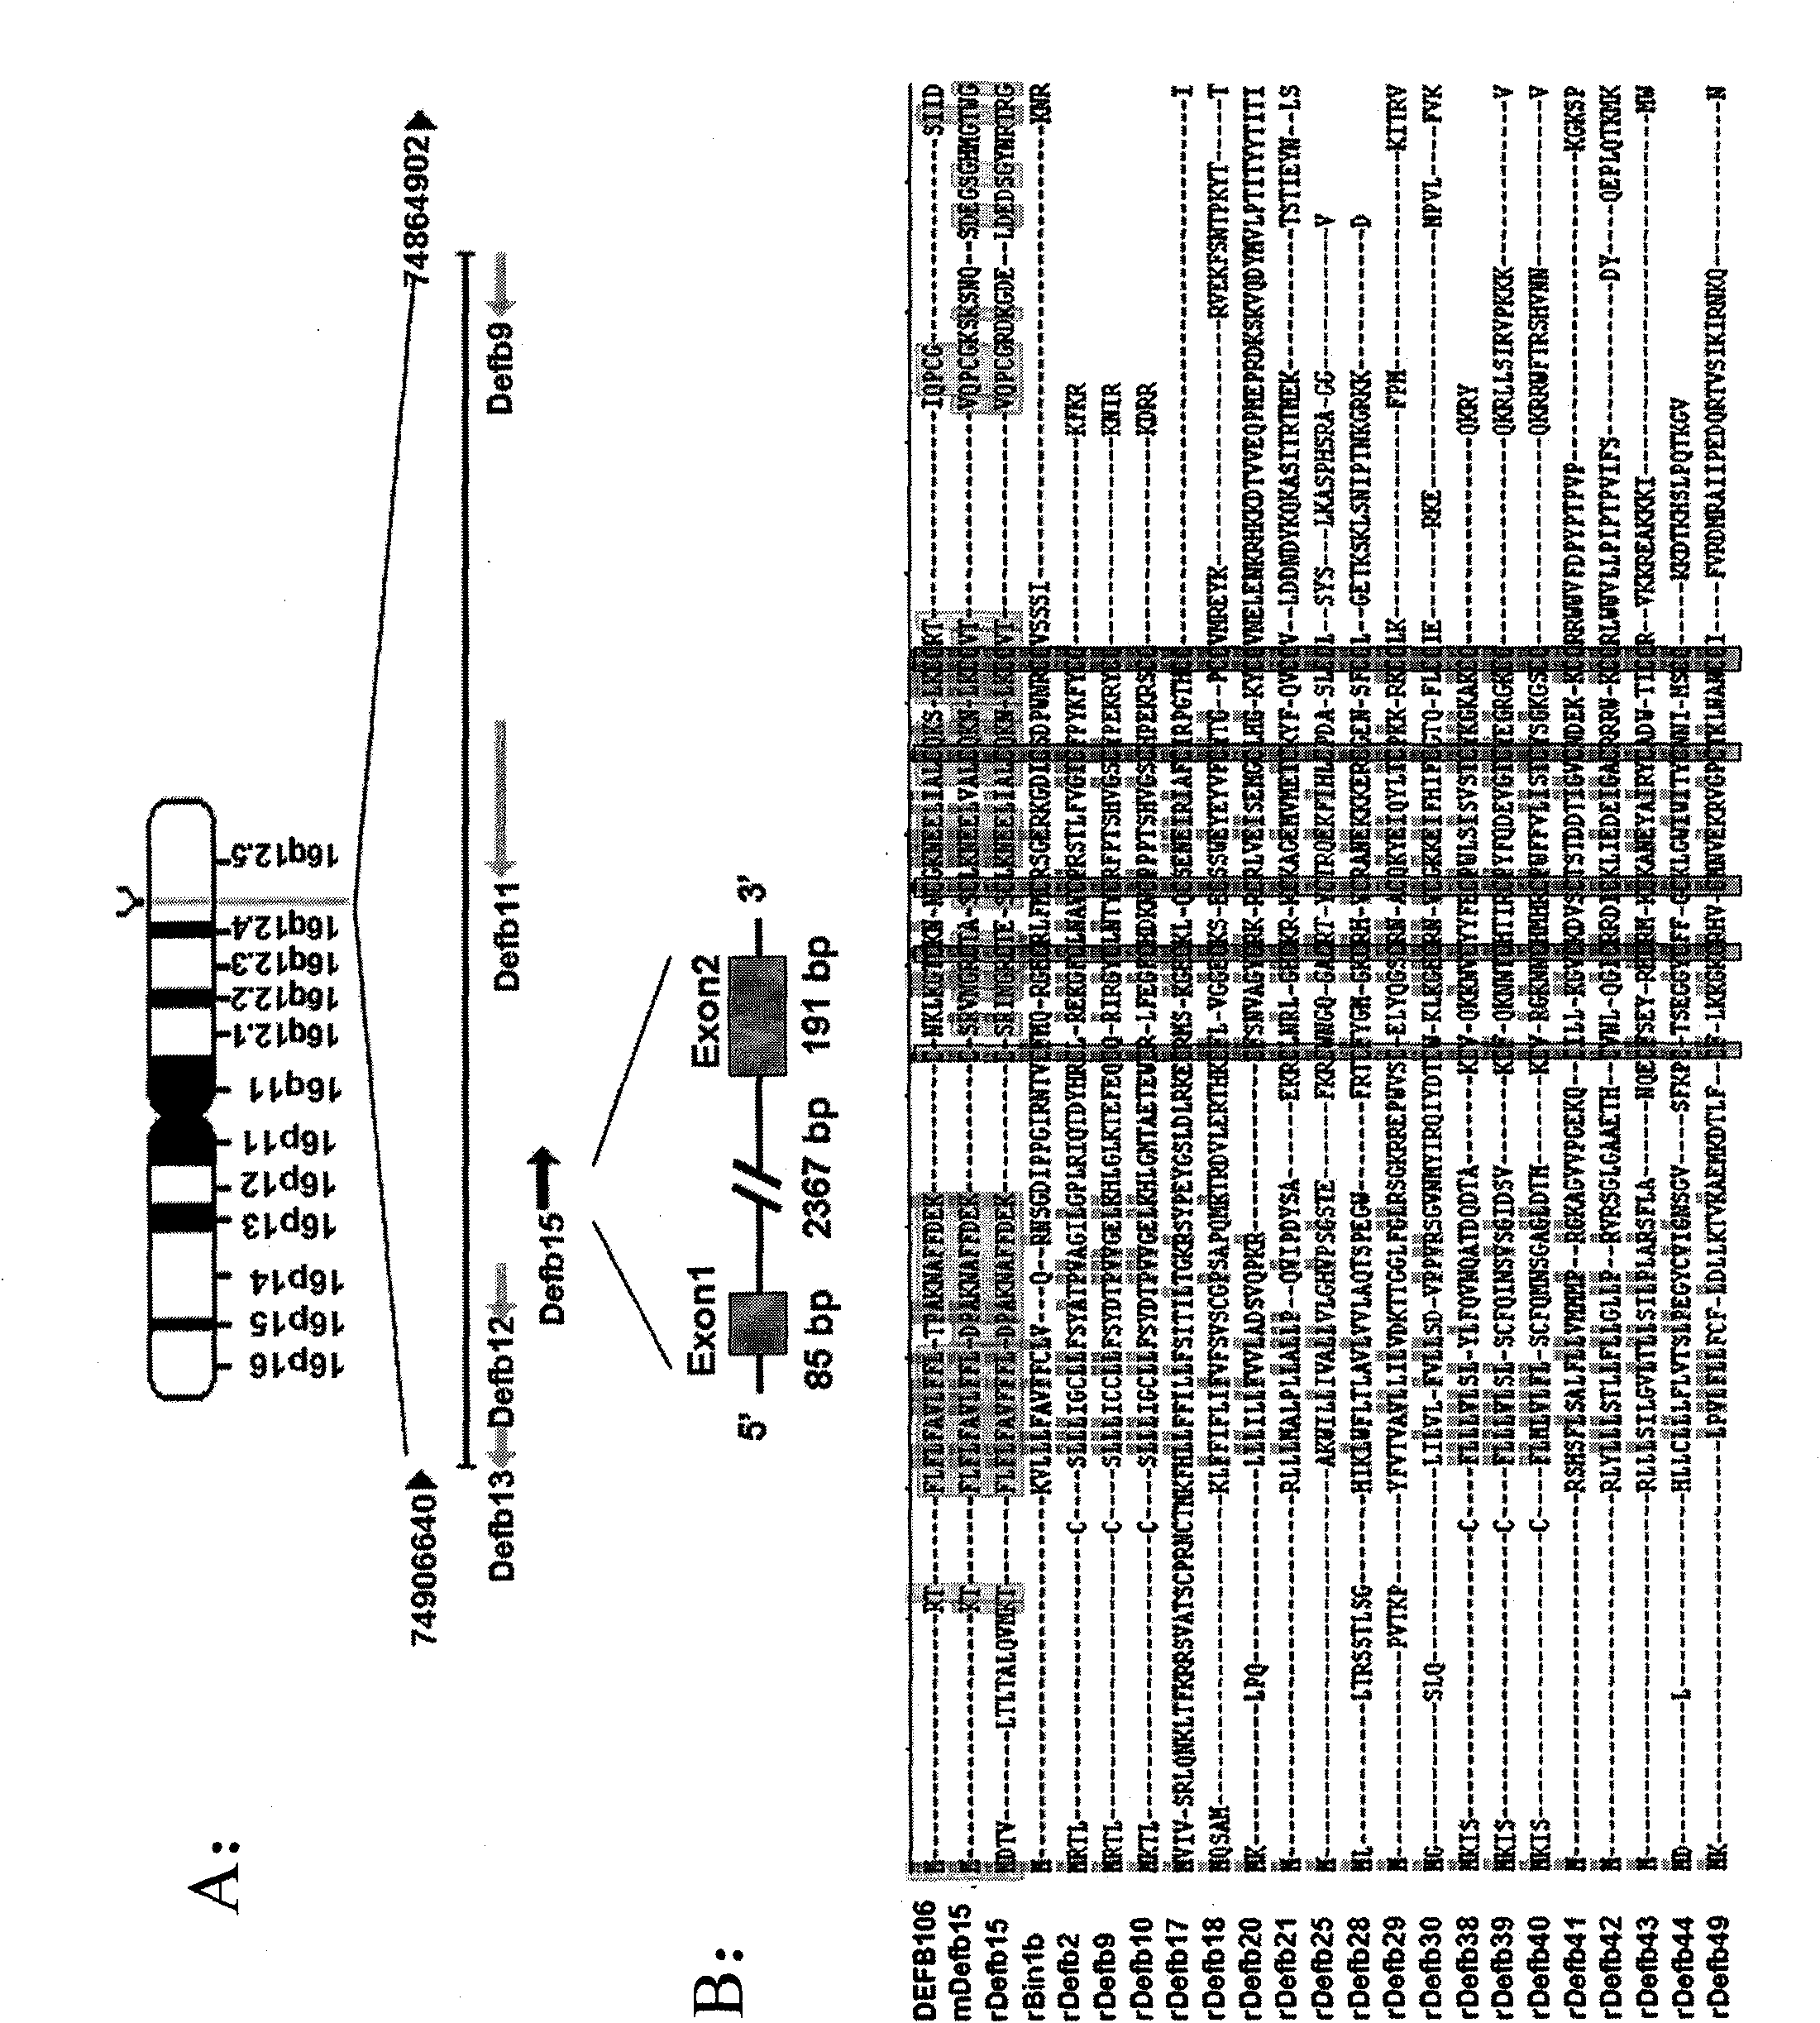 Beta-defensin 15 of specific antibacterial peptides of rat epididymis and application thereof